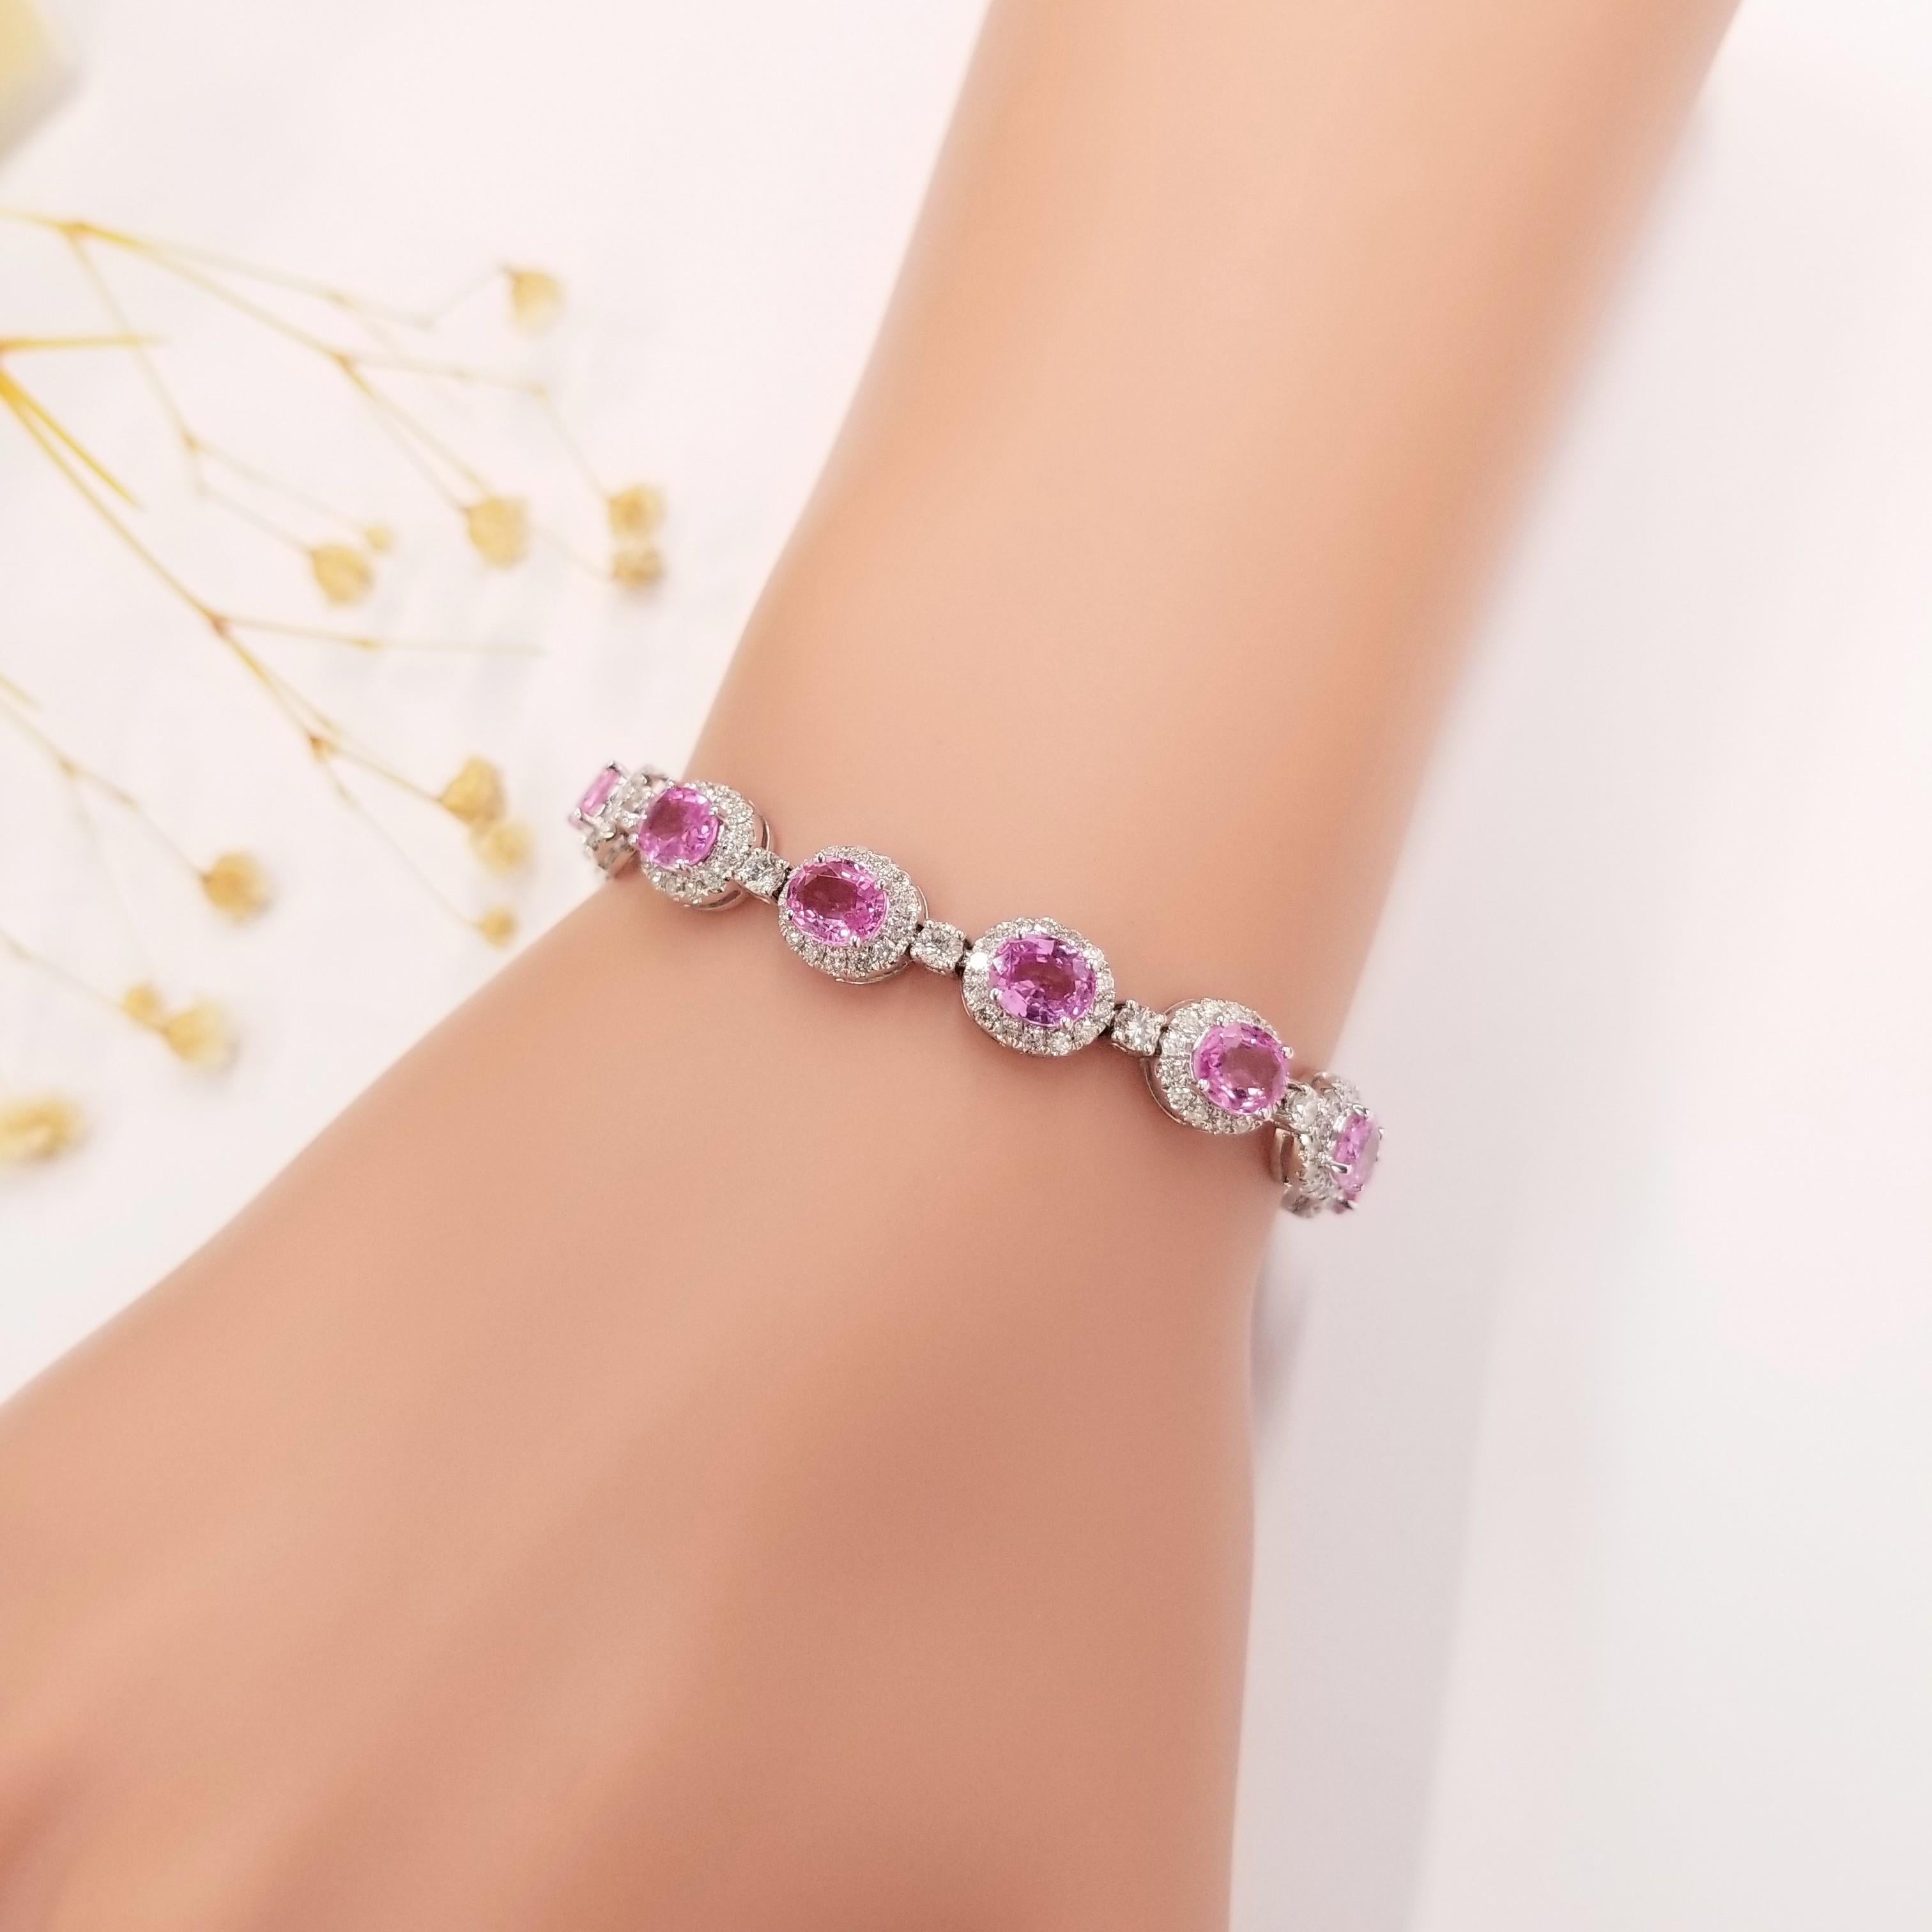 Introducing the breathtaking IGI Certified 11.08Ct Pink Sapphire & Diamond Bracelet in 18K Gold. This exceptional bracelet showcases a collection of oval-shaped pink sapphires, each exuding an intense purplish pink color. With a weight of